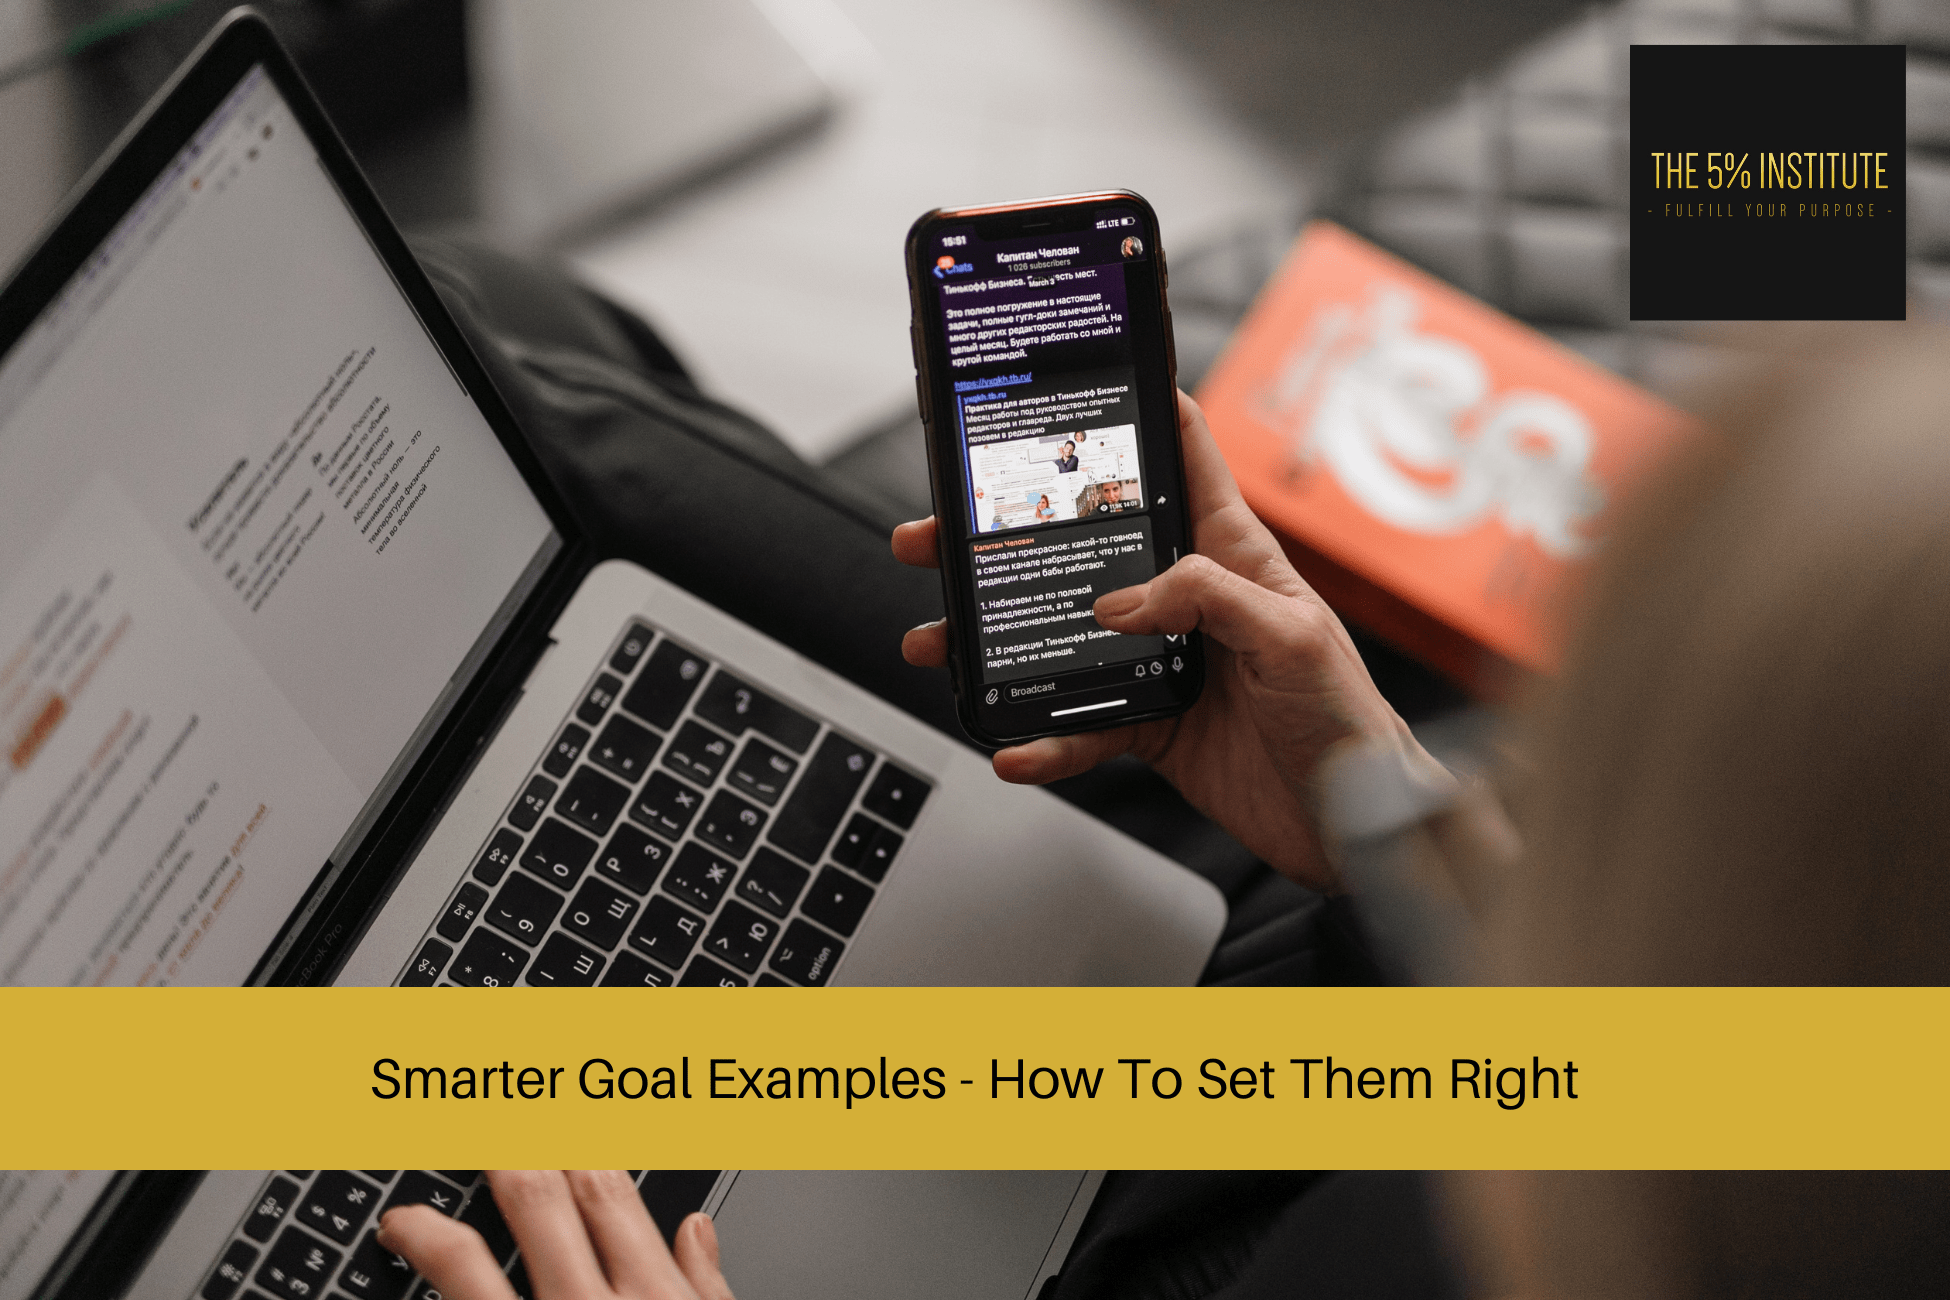 Smarter Goal Examples - How To Set Them Right